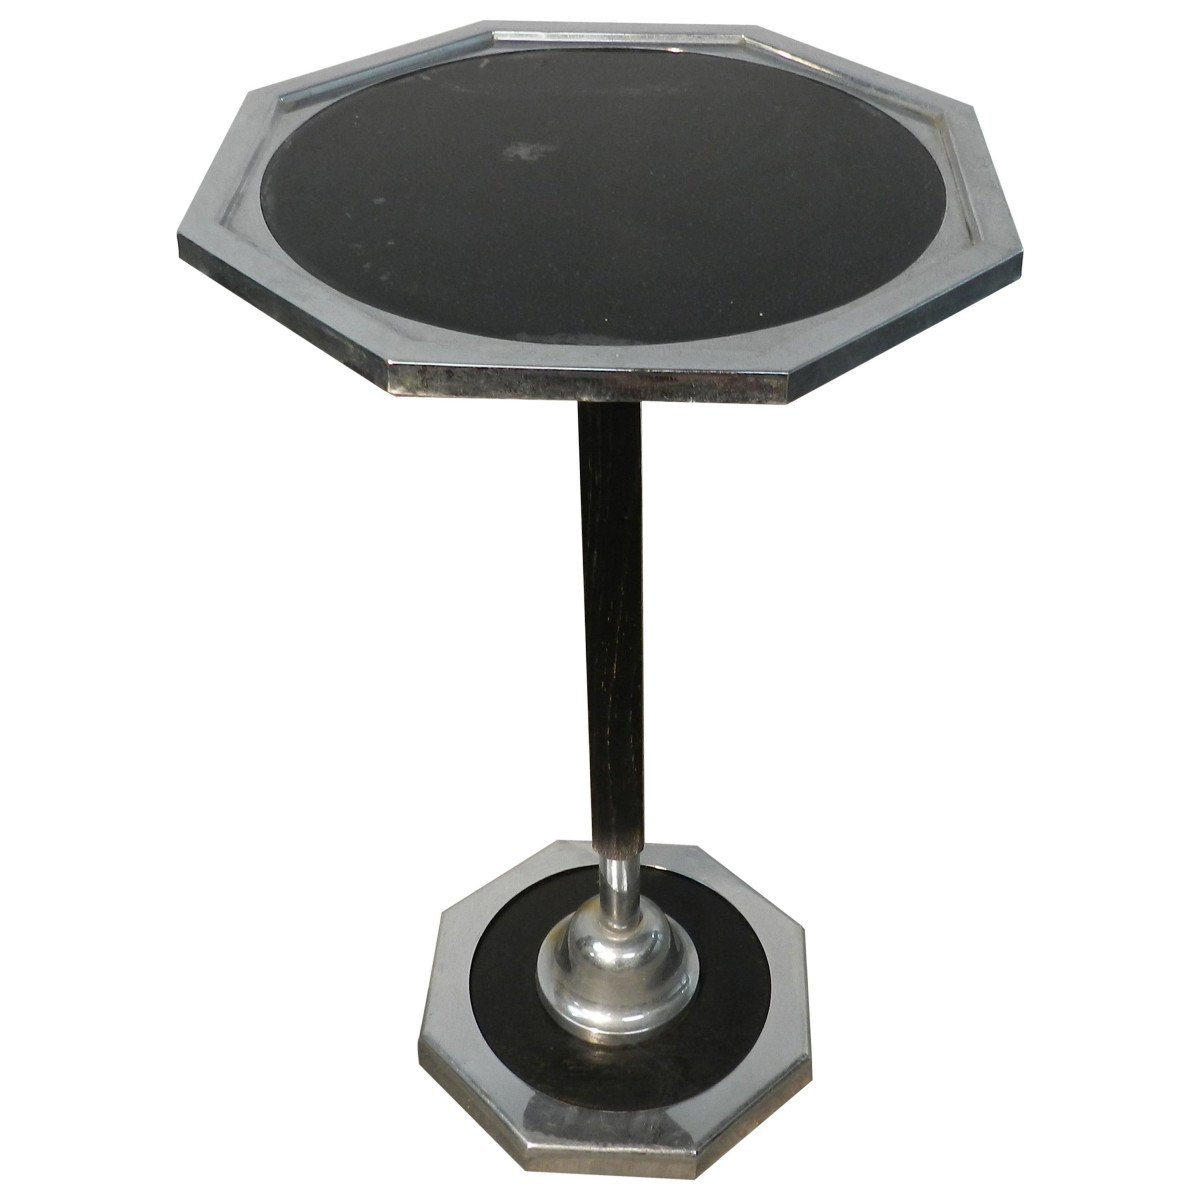 Art Deco Pedestal Table In Blackened Wood, Chrome And Tinted Glass Circa 190/1940